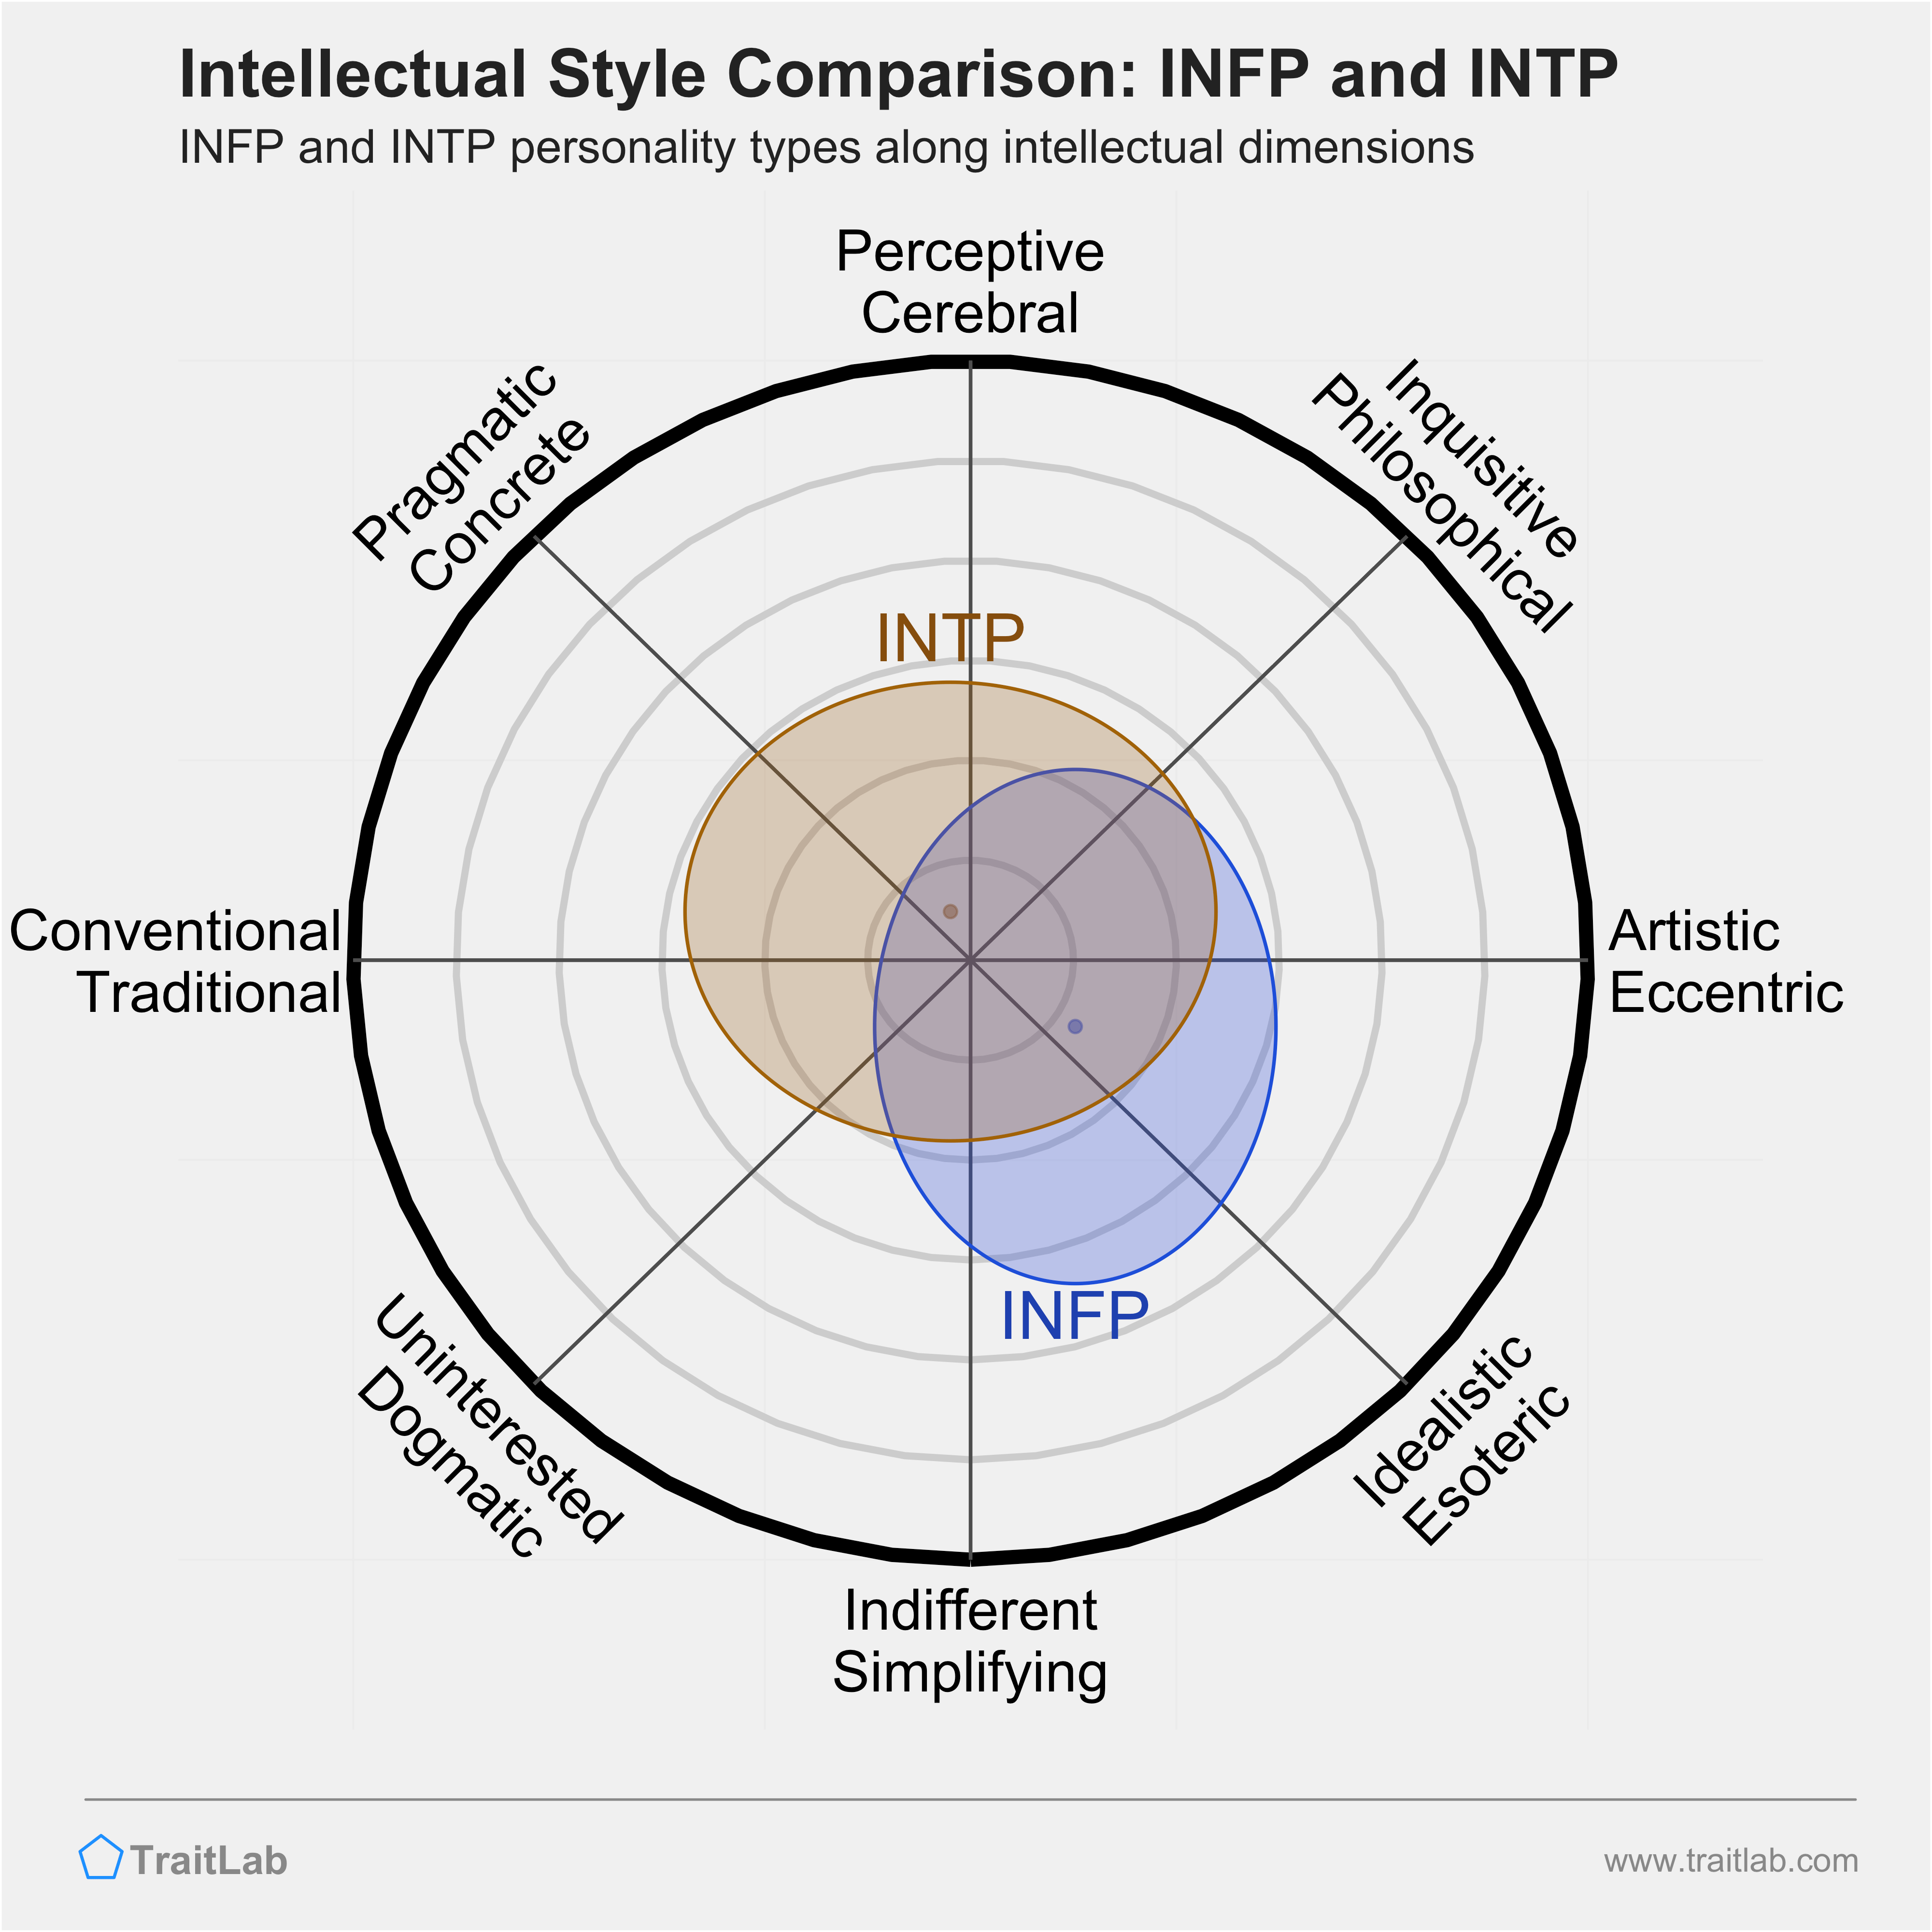 INFP and INTP comparison across intellectual dimensions